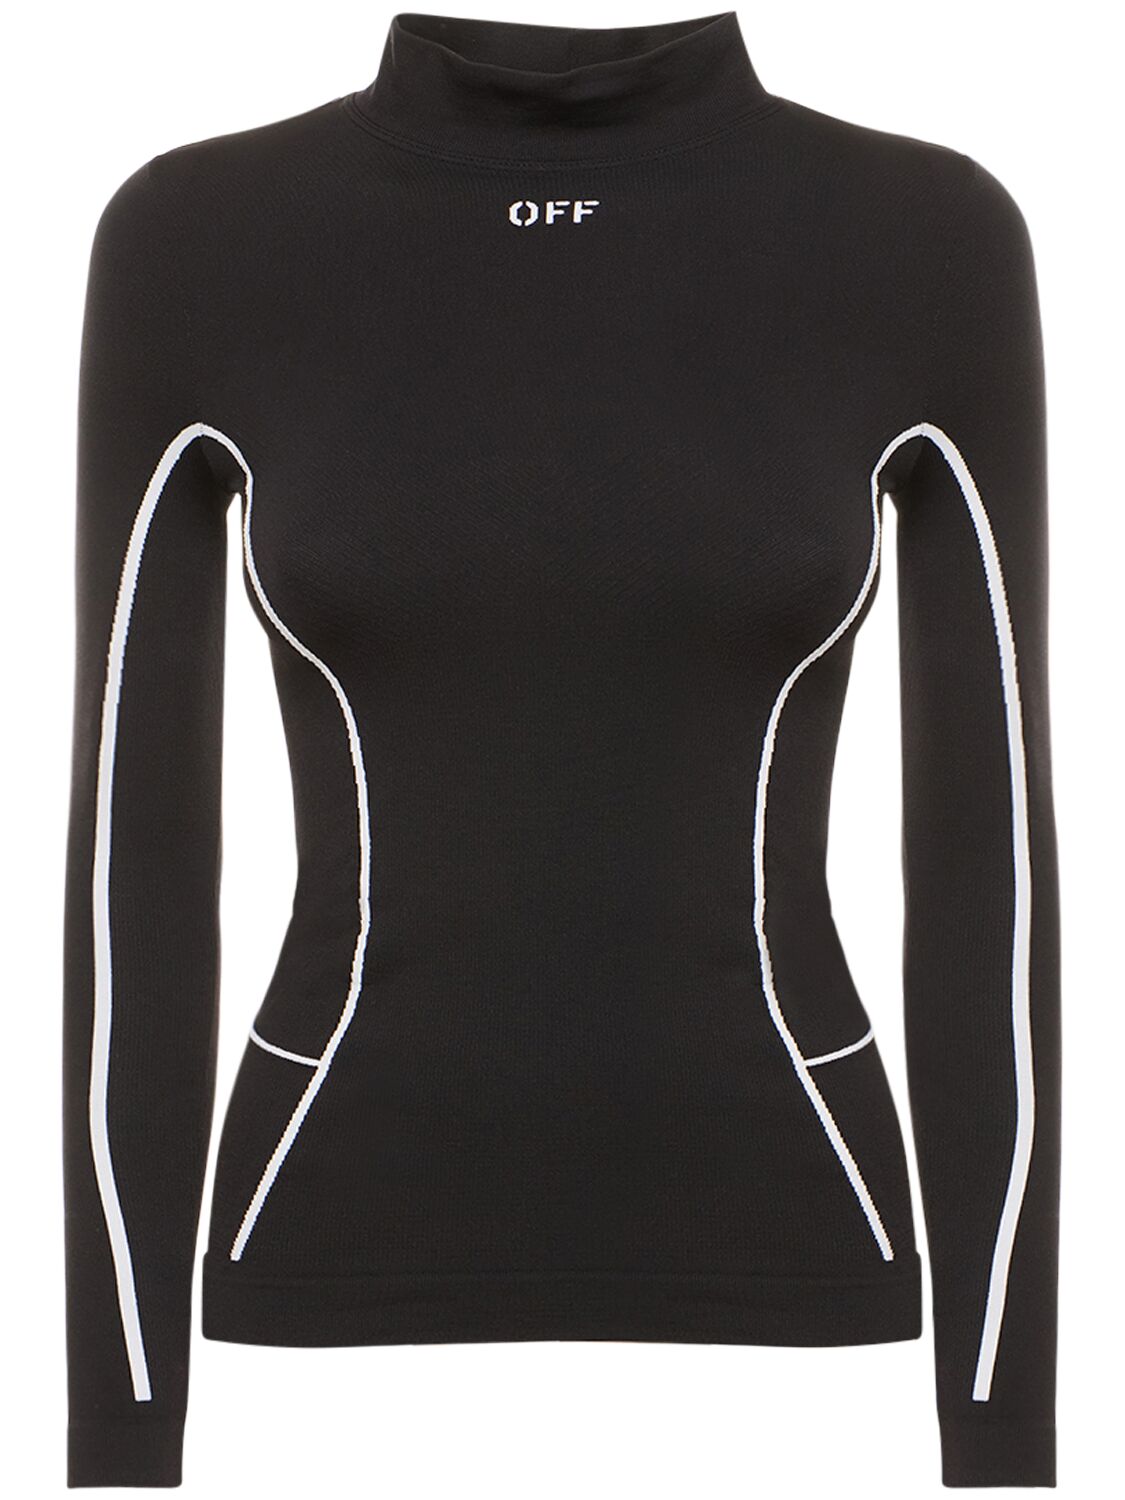 Image of Off Stamp Stretch Tech Long Sleeve Top